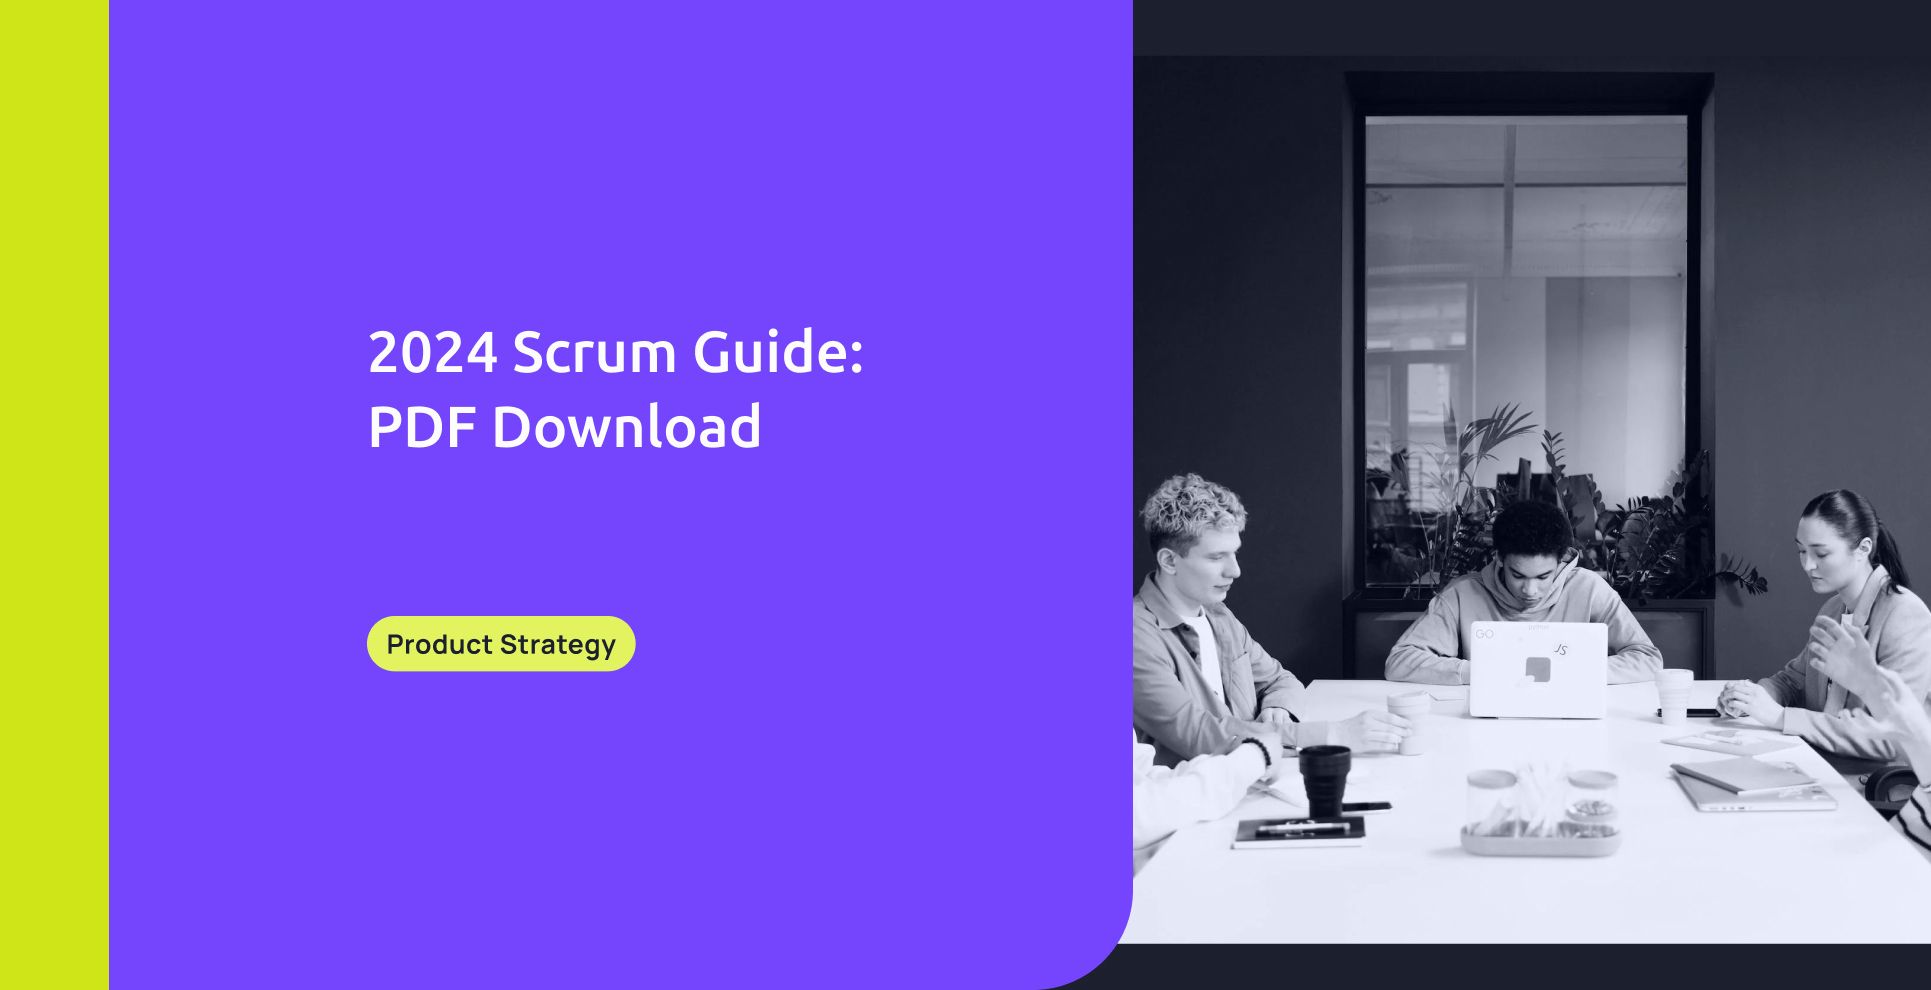 2020 Scrum Guide Changes & PDF Download